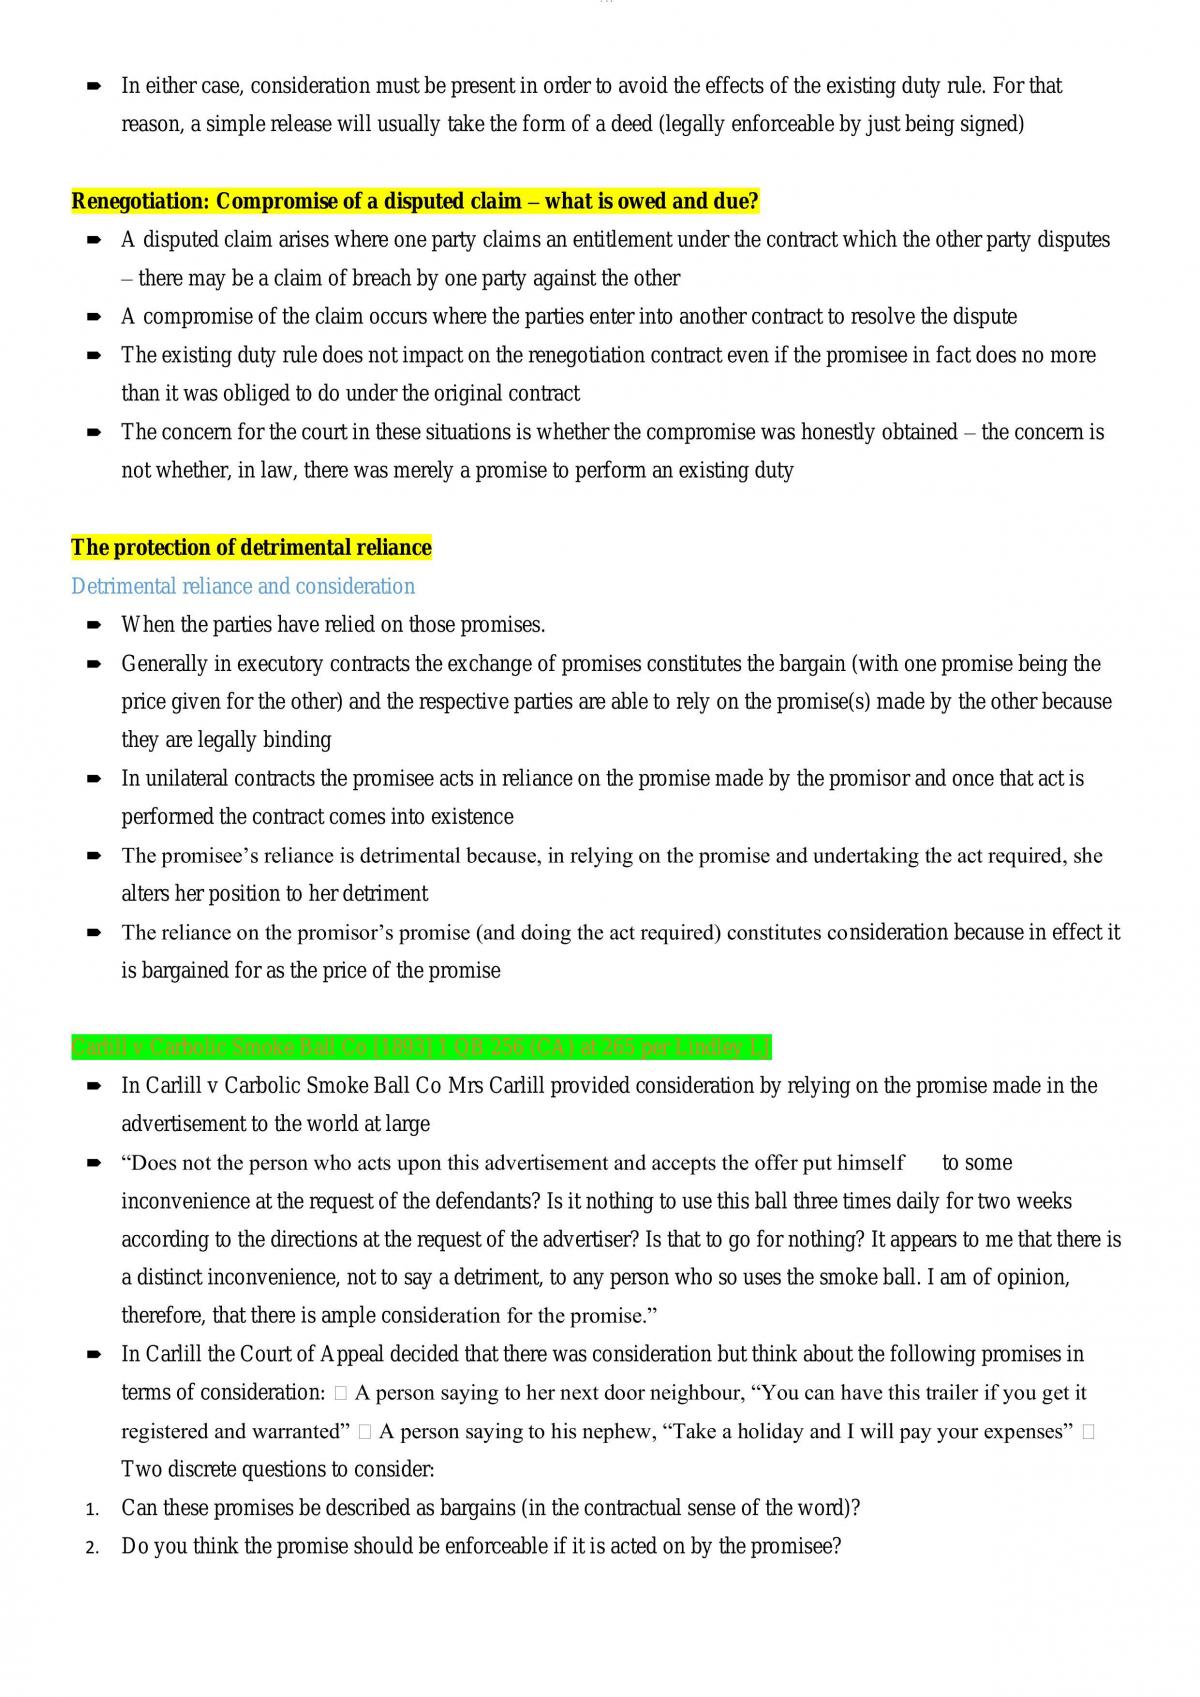 Law of Contract Week 1 to Week 10 Notes (Case commentary included) - Page 1